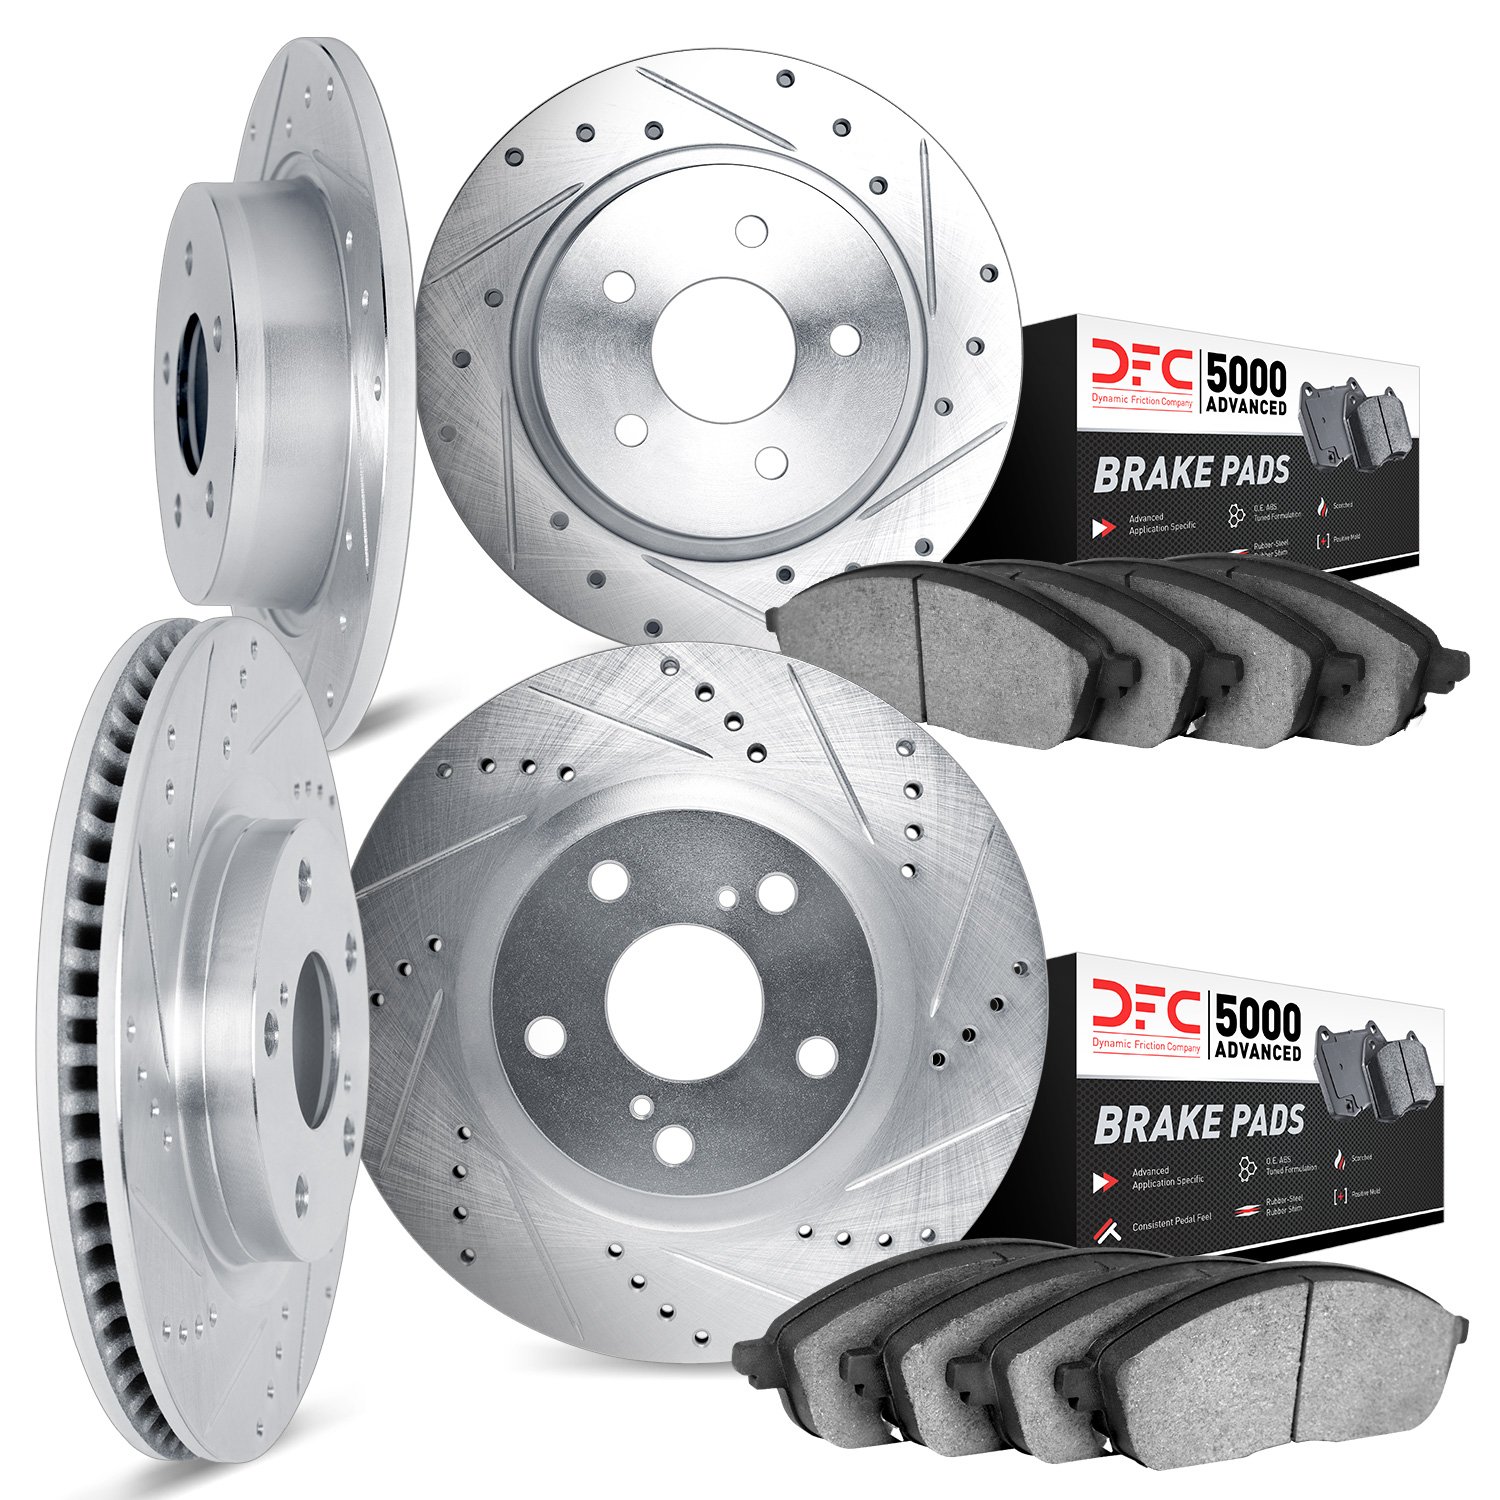 7504-74063 Drilled/Slotted Brake Rotors w/5000 Advanced Brake Pads Kit [Silver], 2013-2014 Audi/Volkswagen, Position: Front and